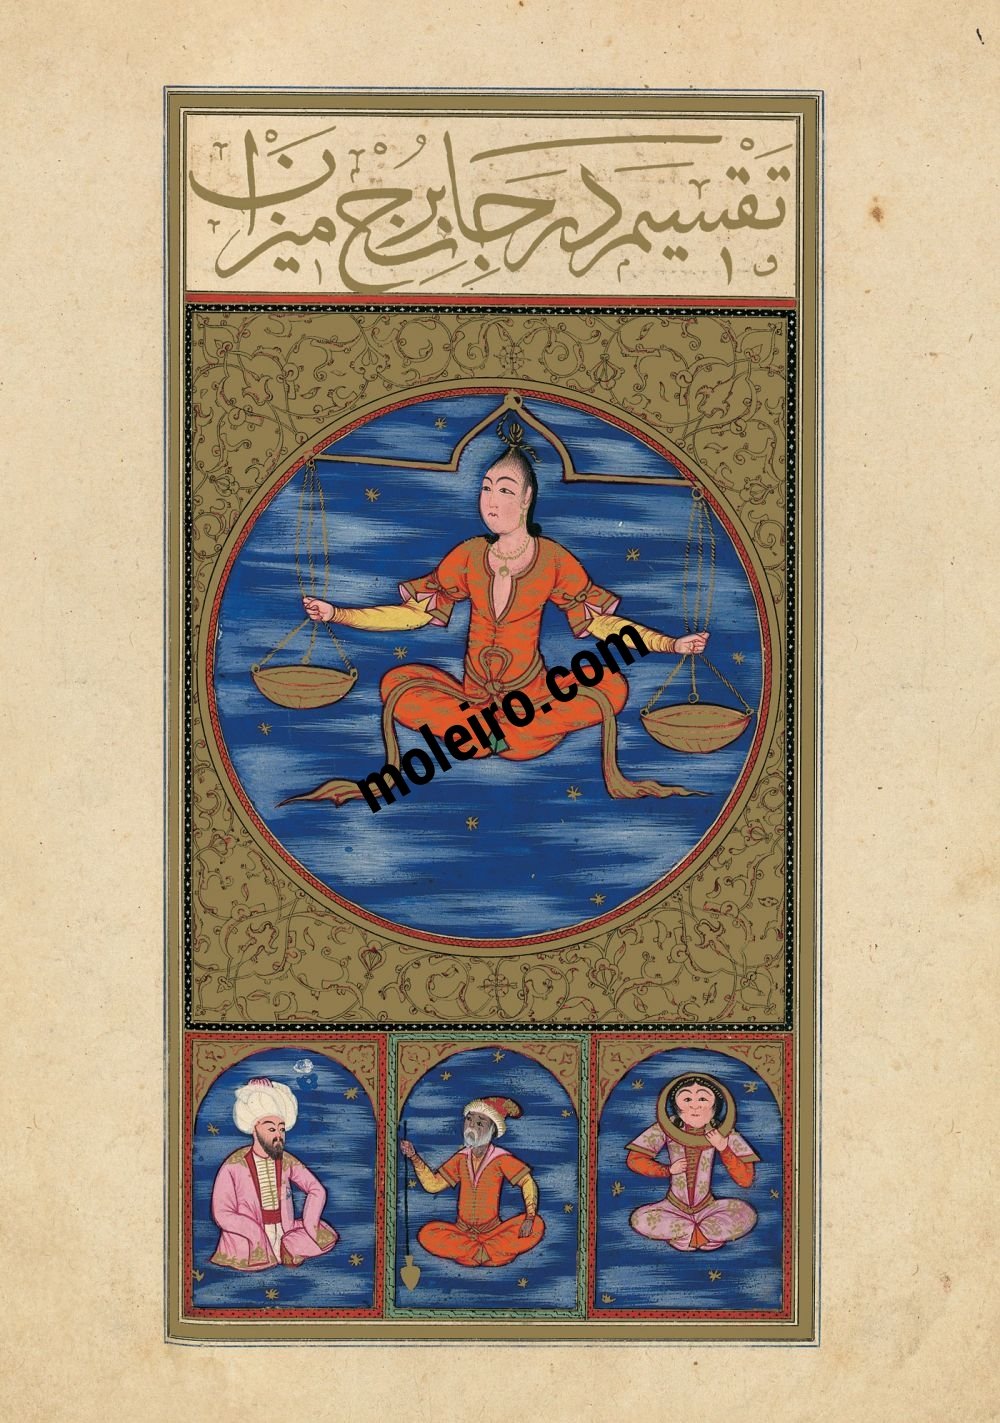 The Book of Felicity f. 20v, The Image of Libra